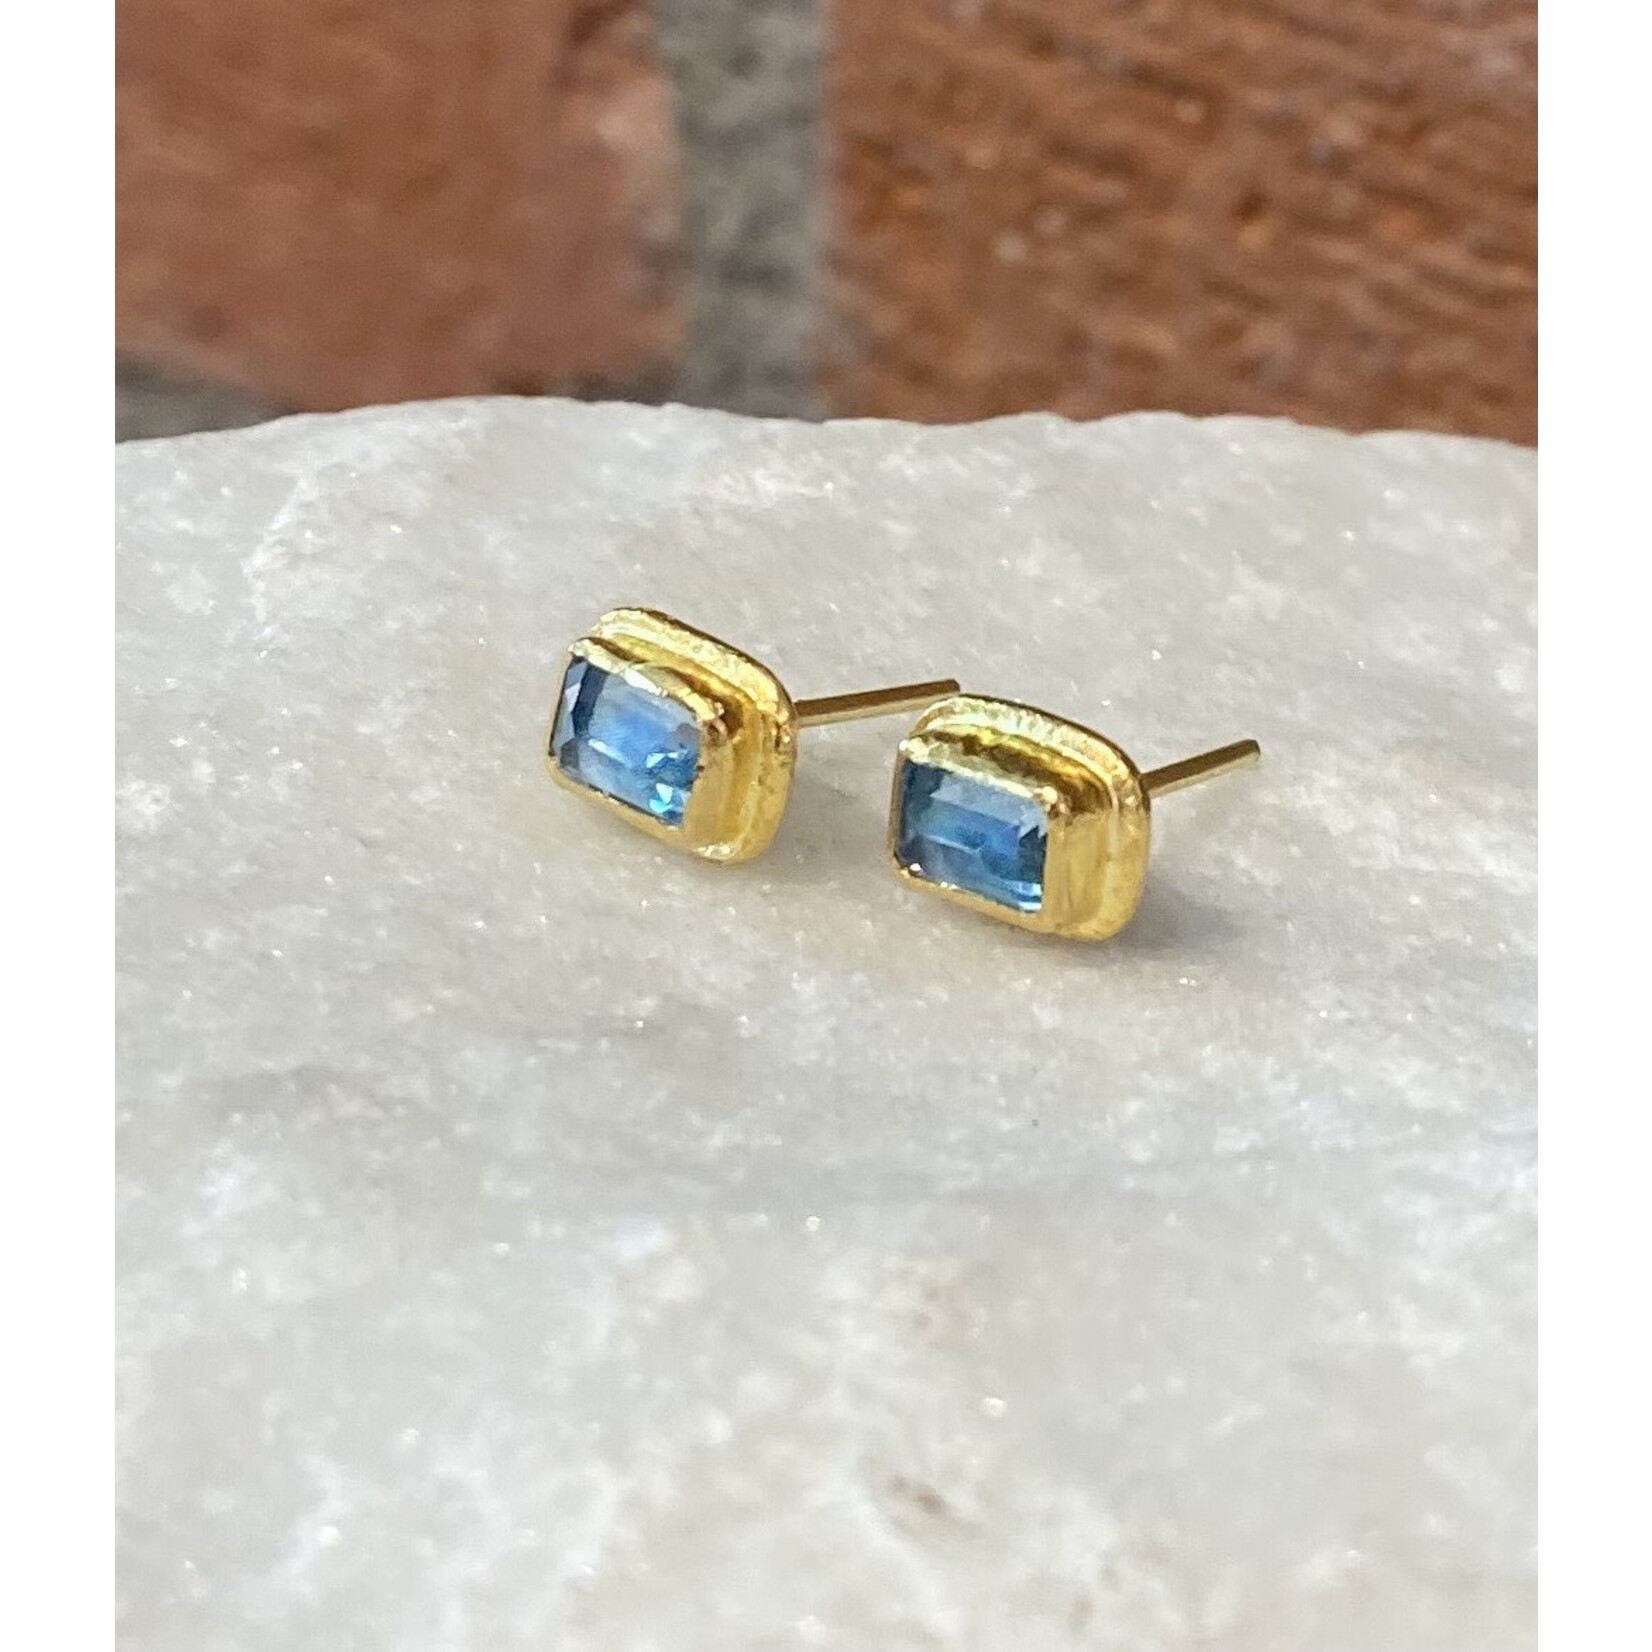 ARA Collection 24k Gold and Blue Topaz Post Earrings